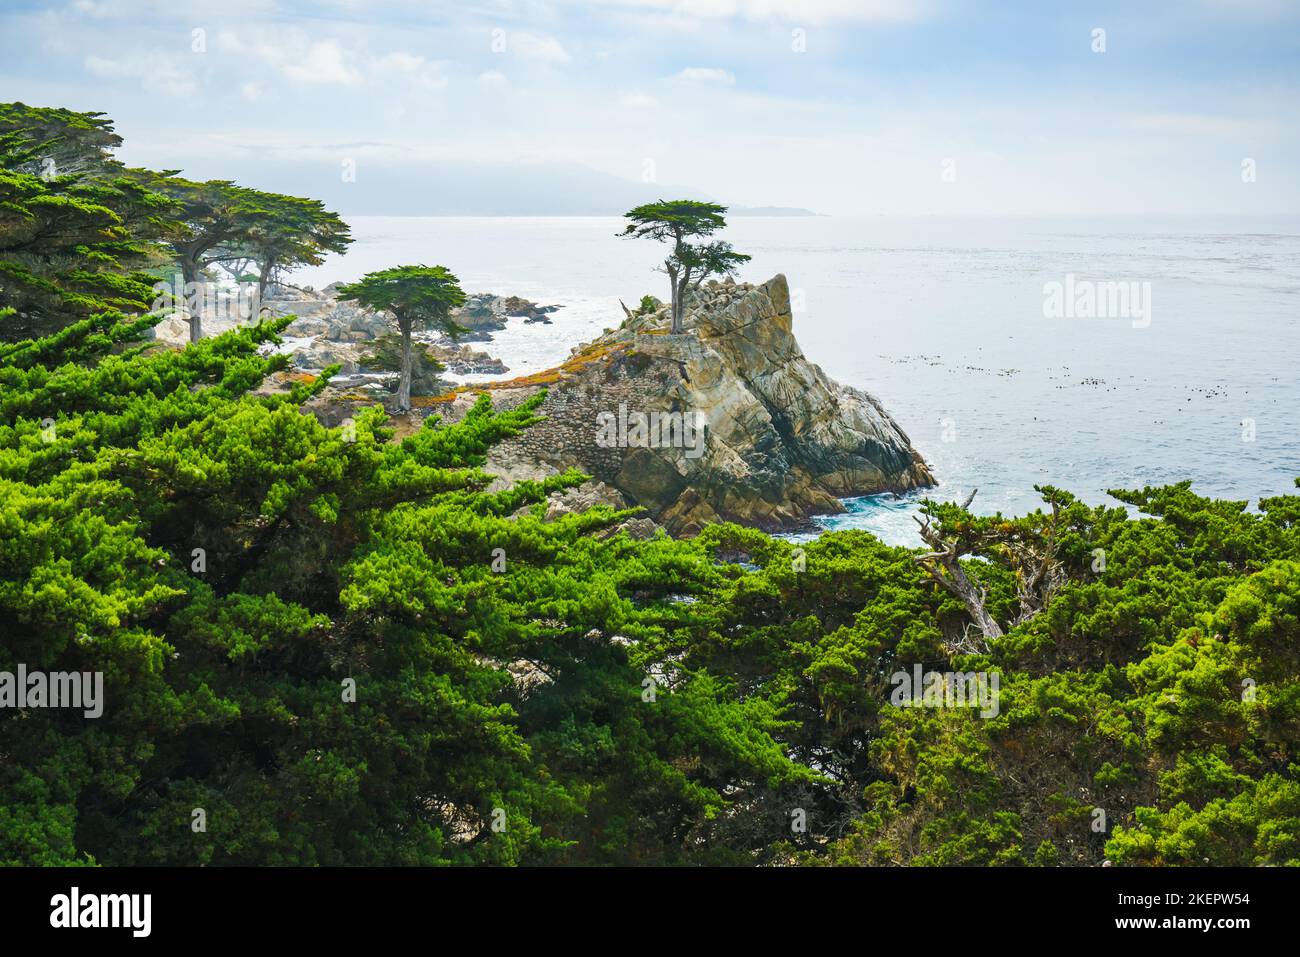 The Lone Cypress Tree stands on a granite hill off the 17-mile drive in Pebble Beach, Monterey Bay, California Stock Photo